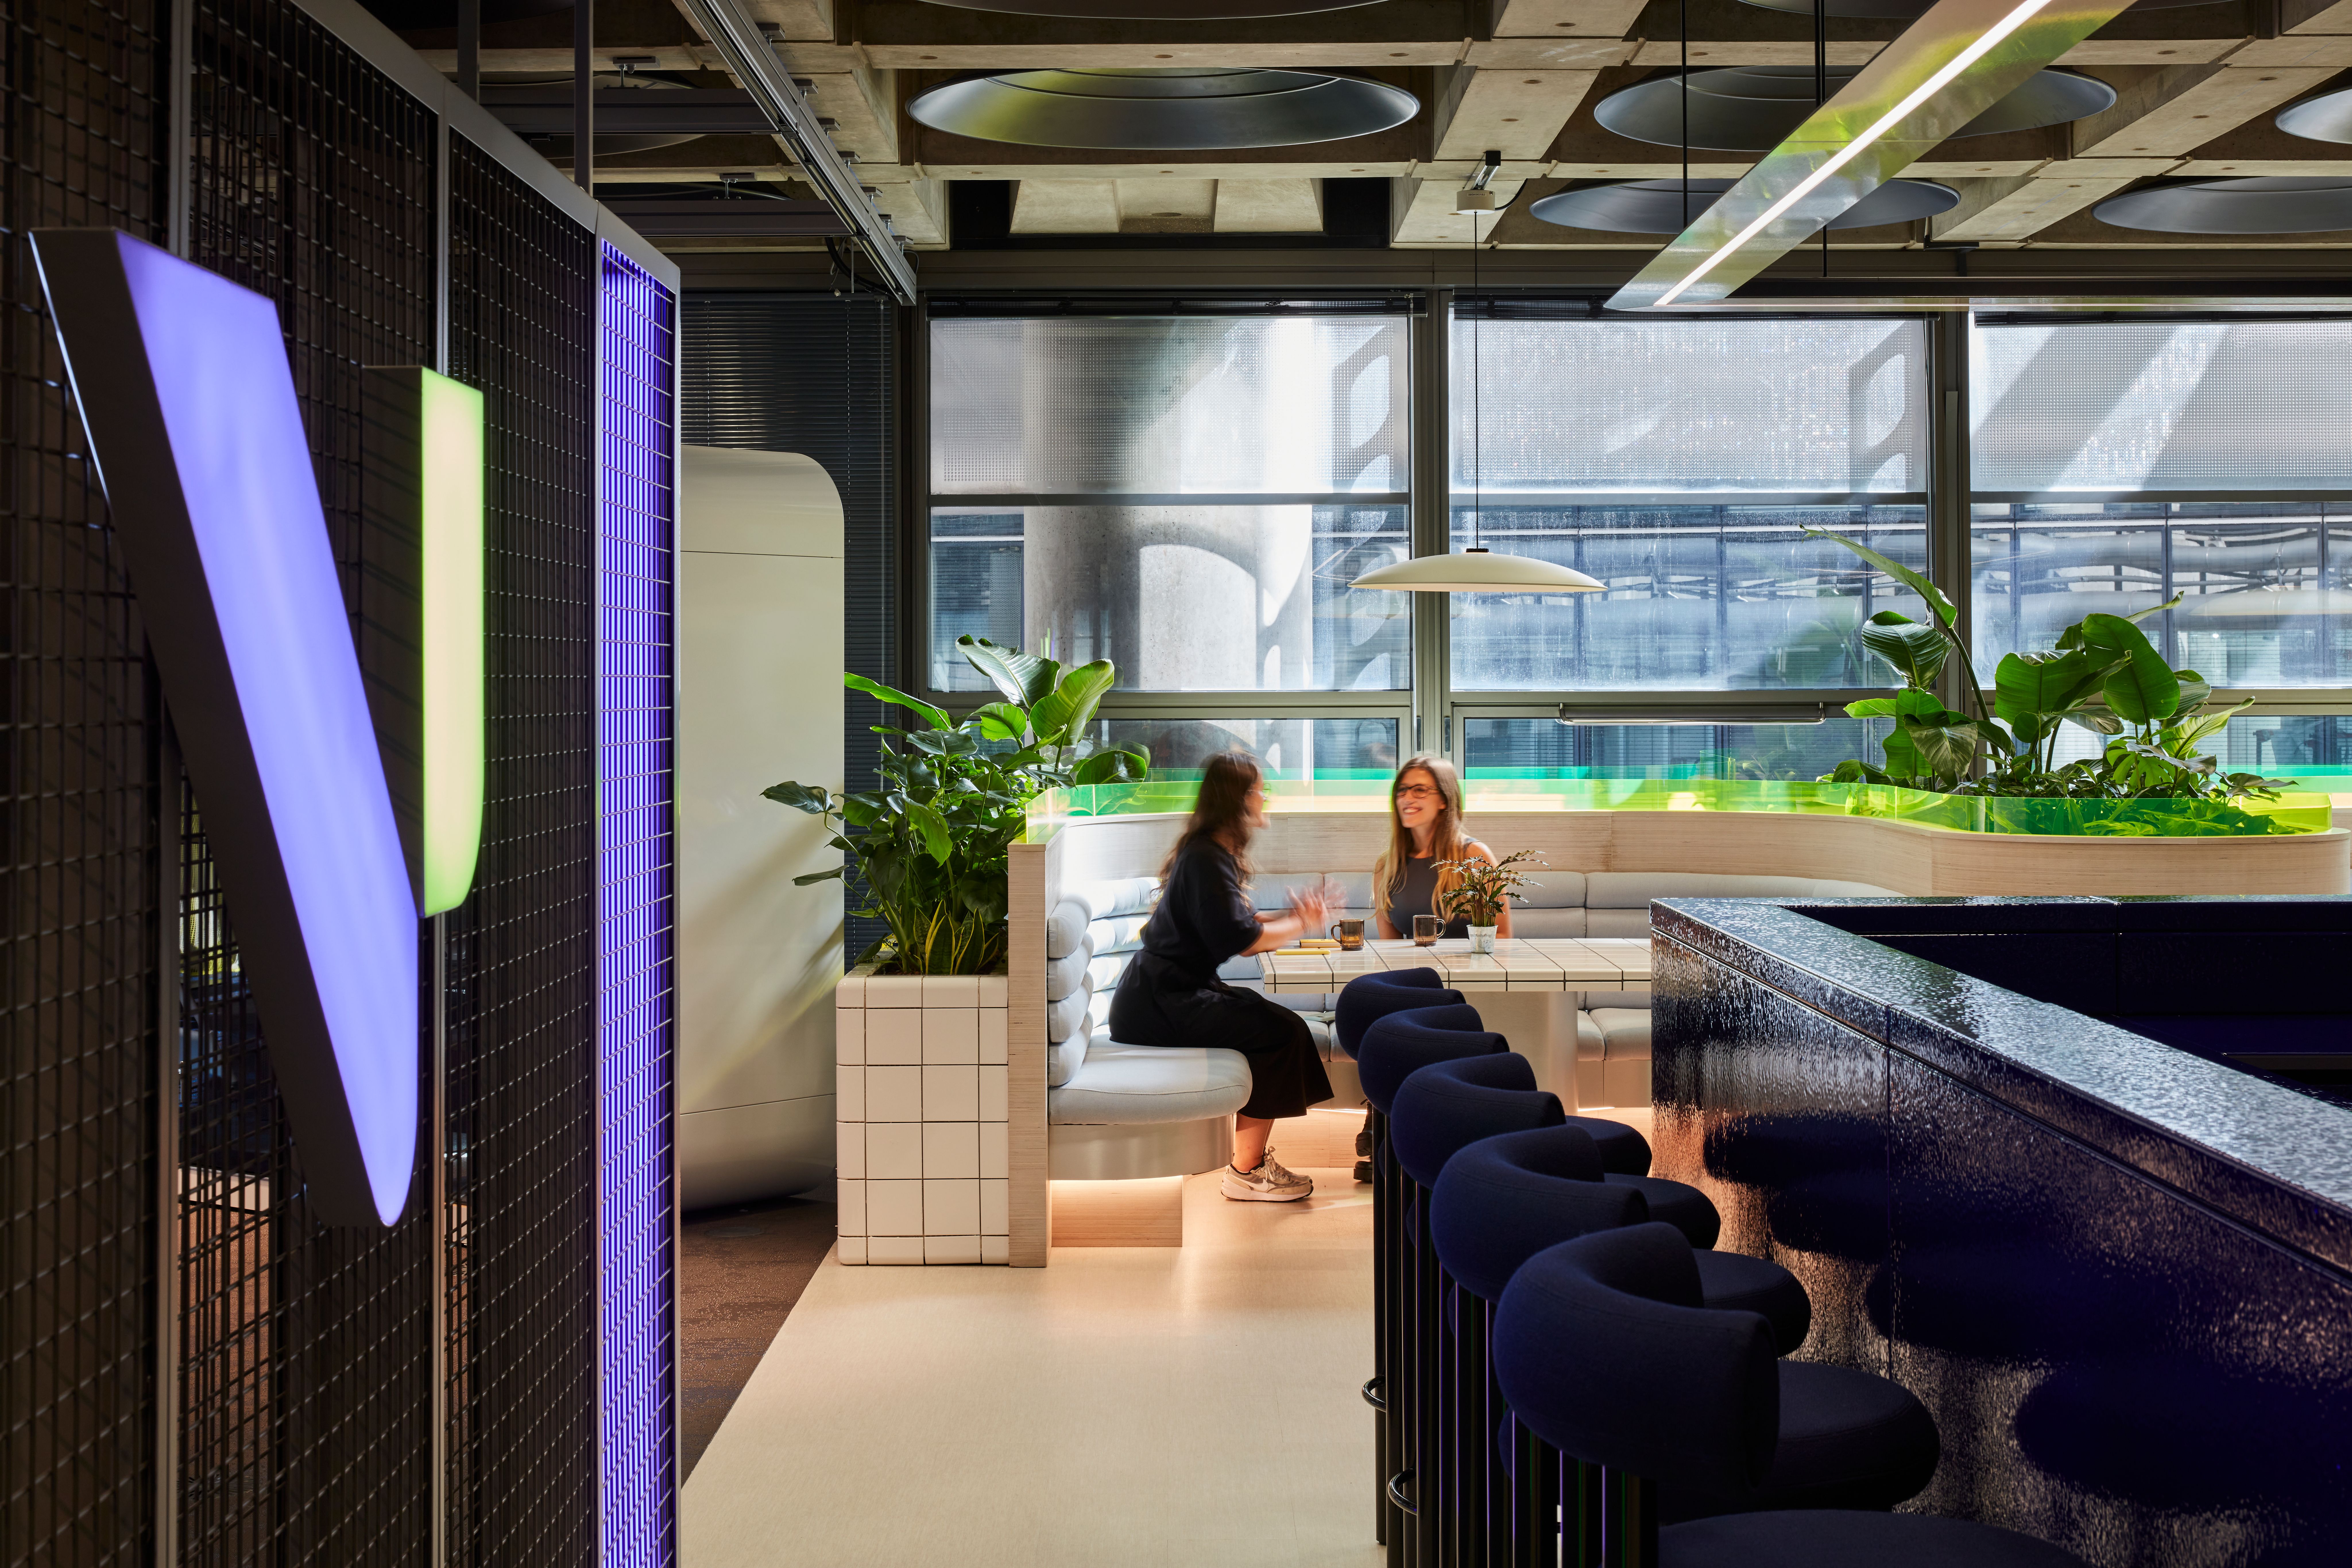 Velonetic, The Lloyd’s Building, featured in Mix Interiors